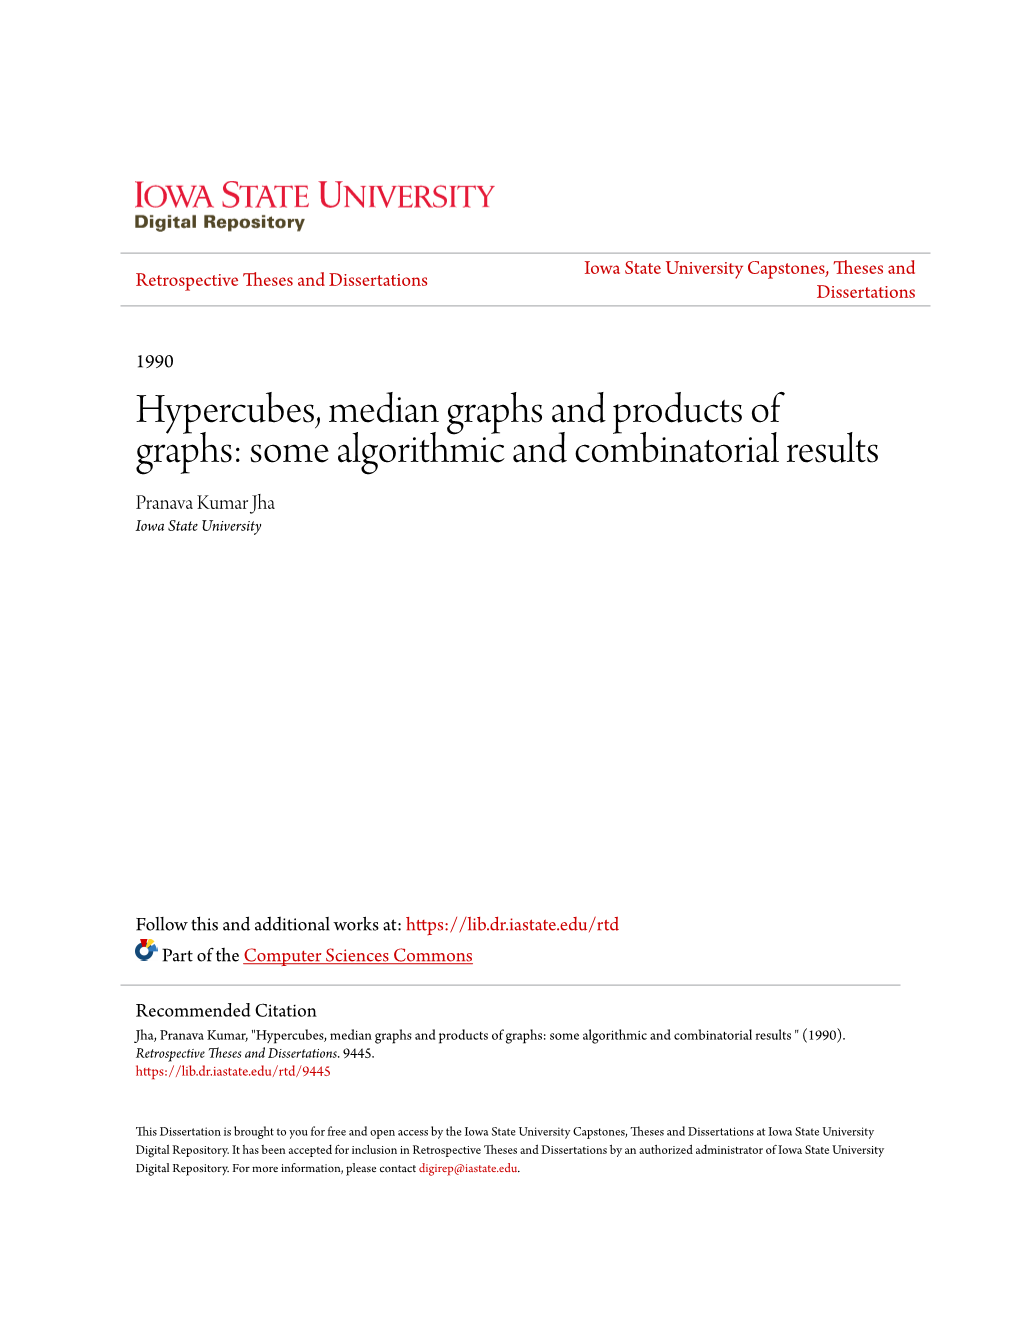 Hypercubes, Median Graphs and Products of Graphs: Some Algorithmic and Combinatorial Results Pranava Kumar Jha Iowa State University